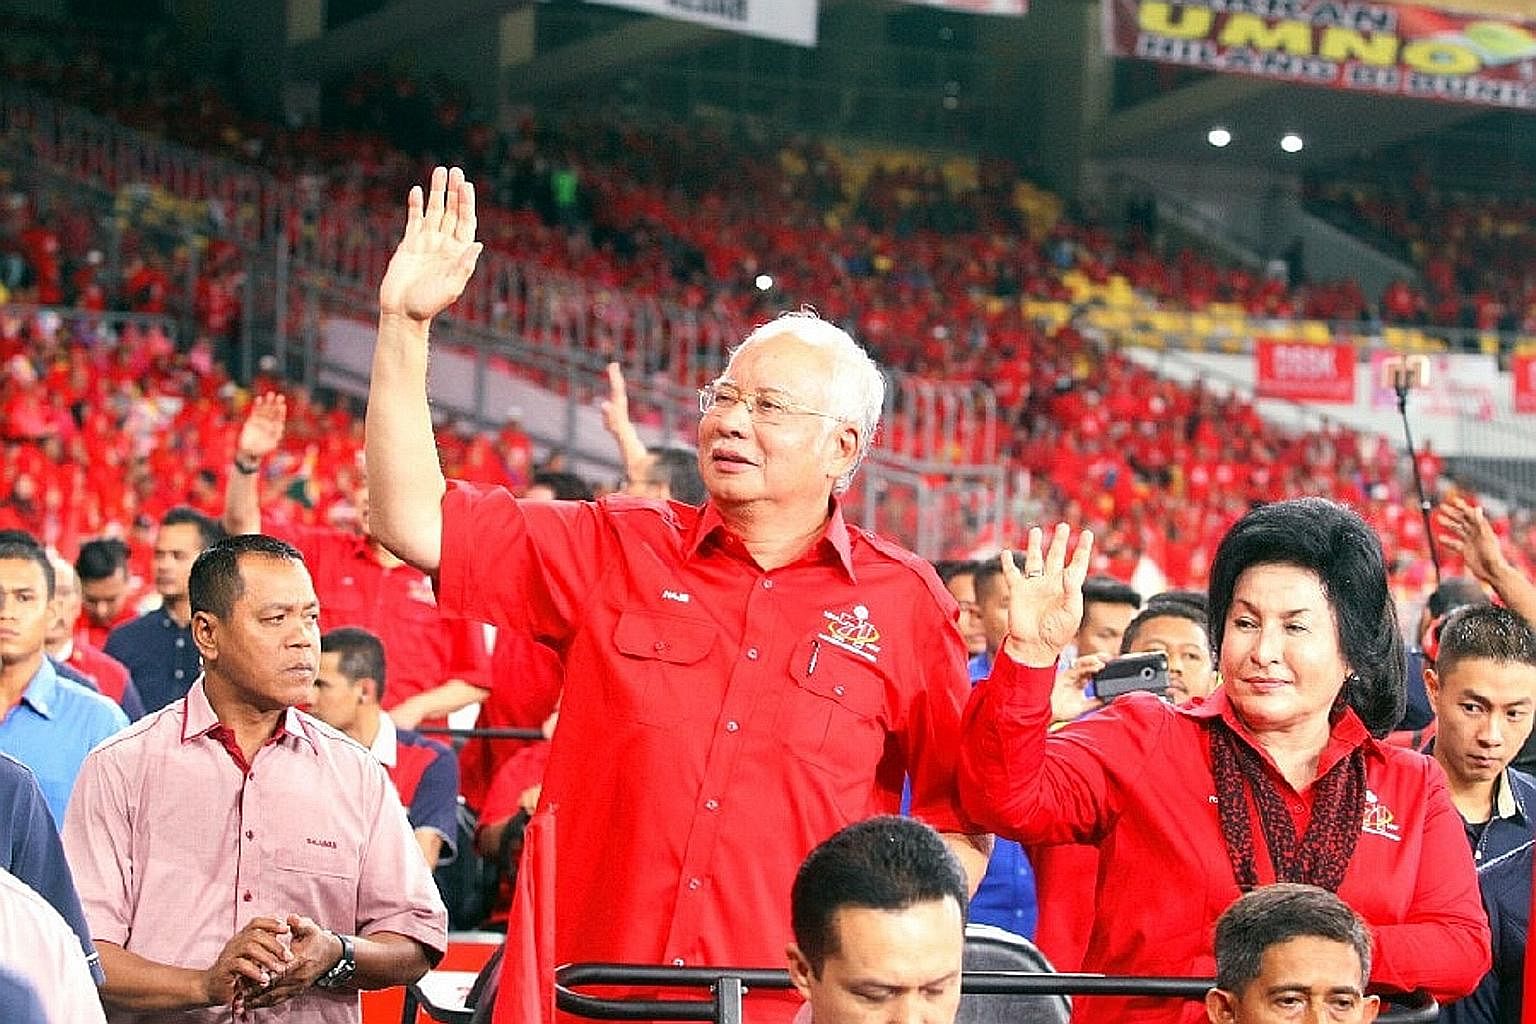 Malaysian Prime Minister Najib Razak and his wife at the ruling Umno's 71st anniversary celebrations this year.